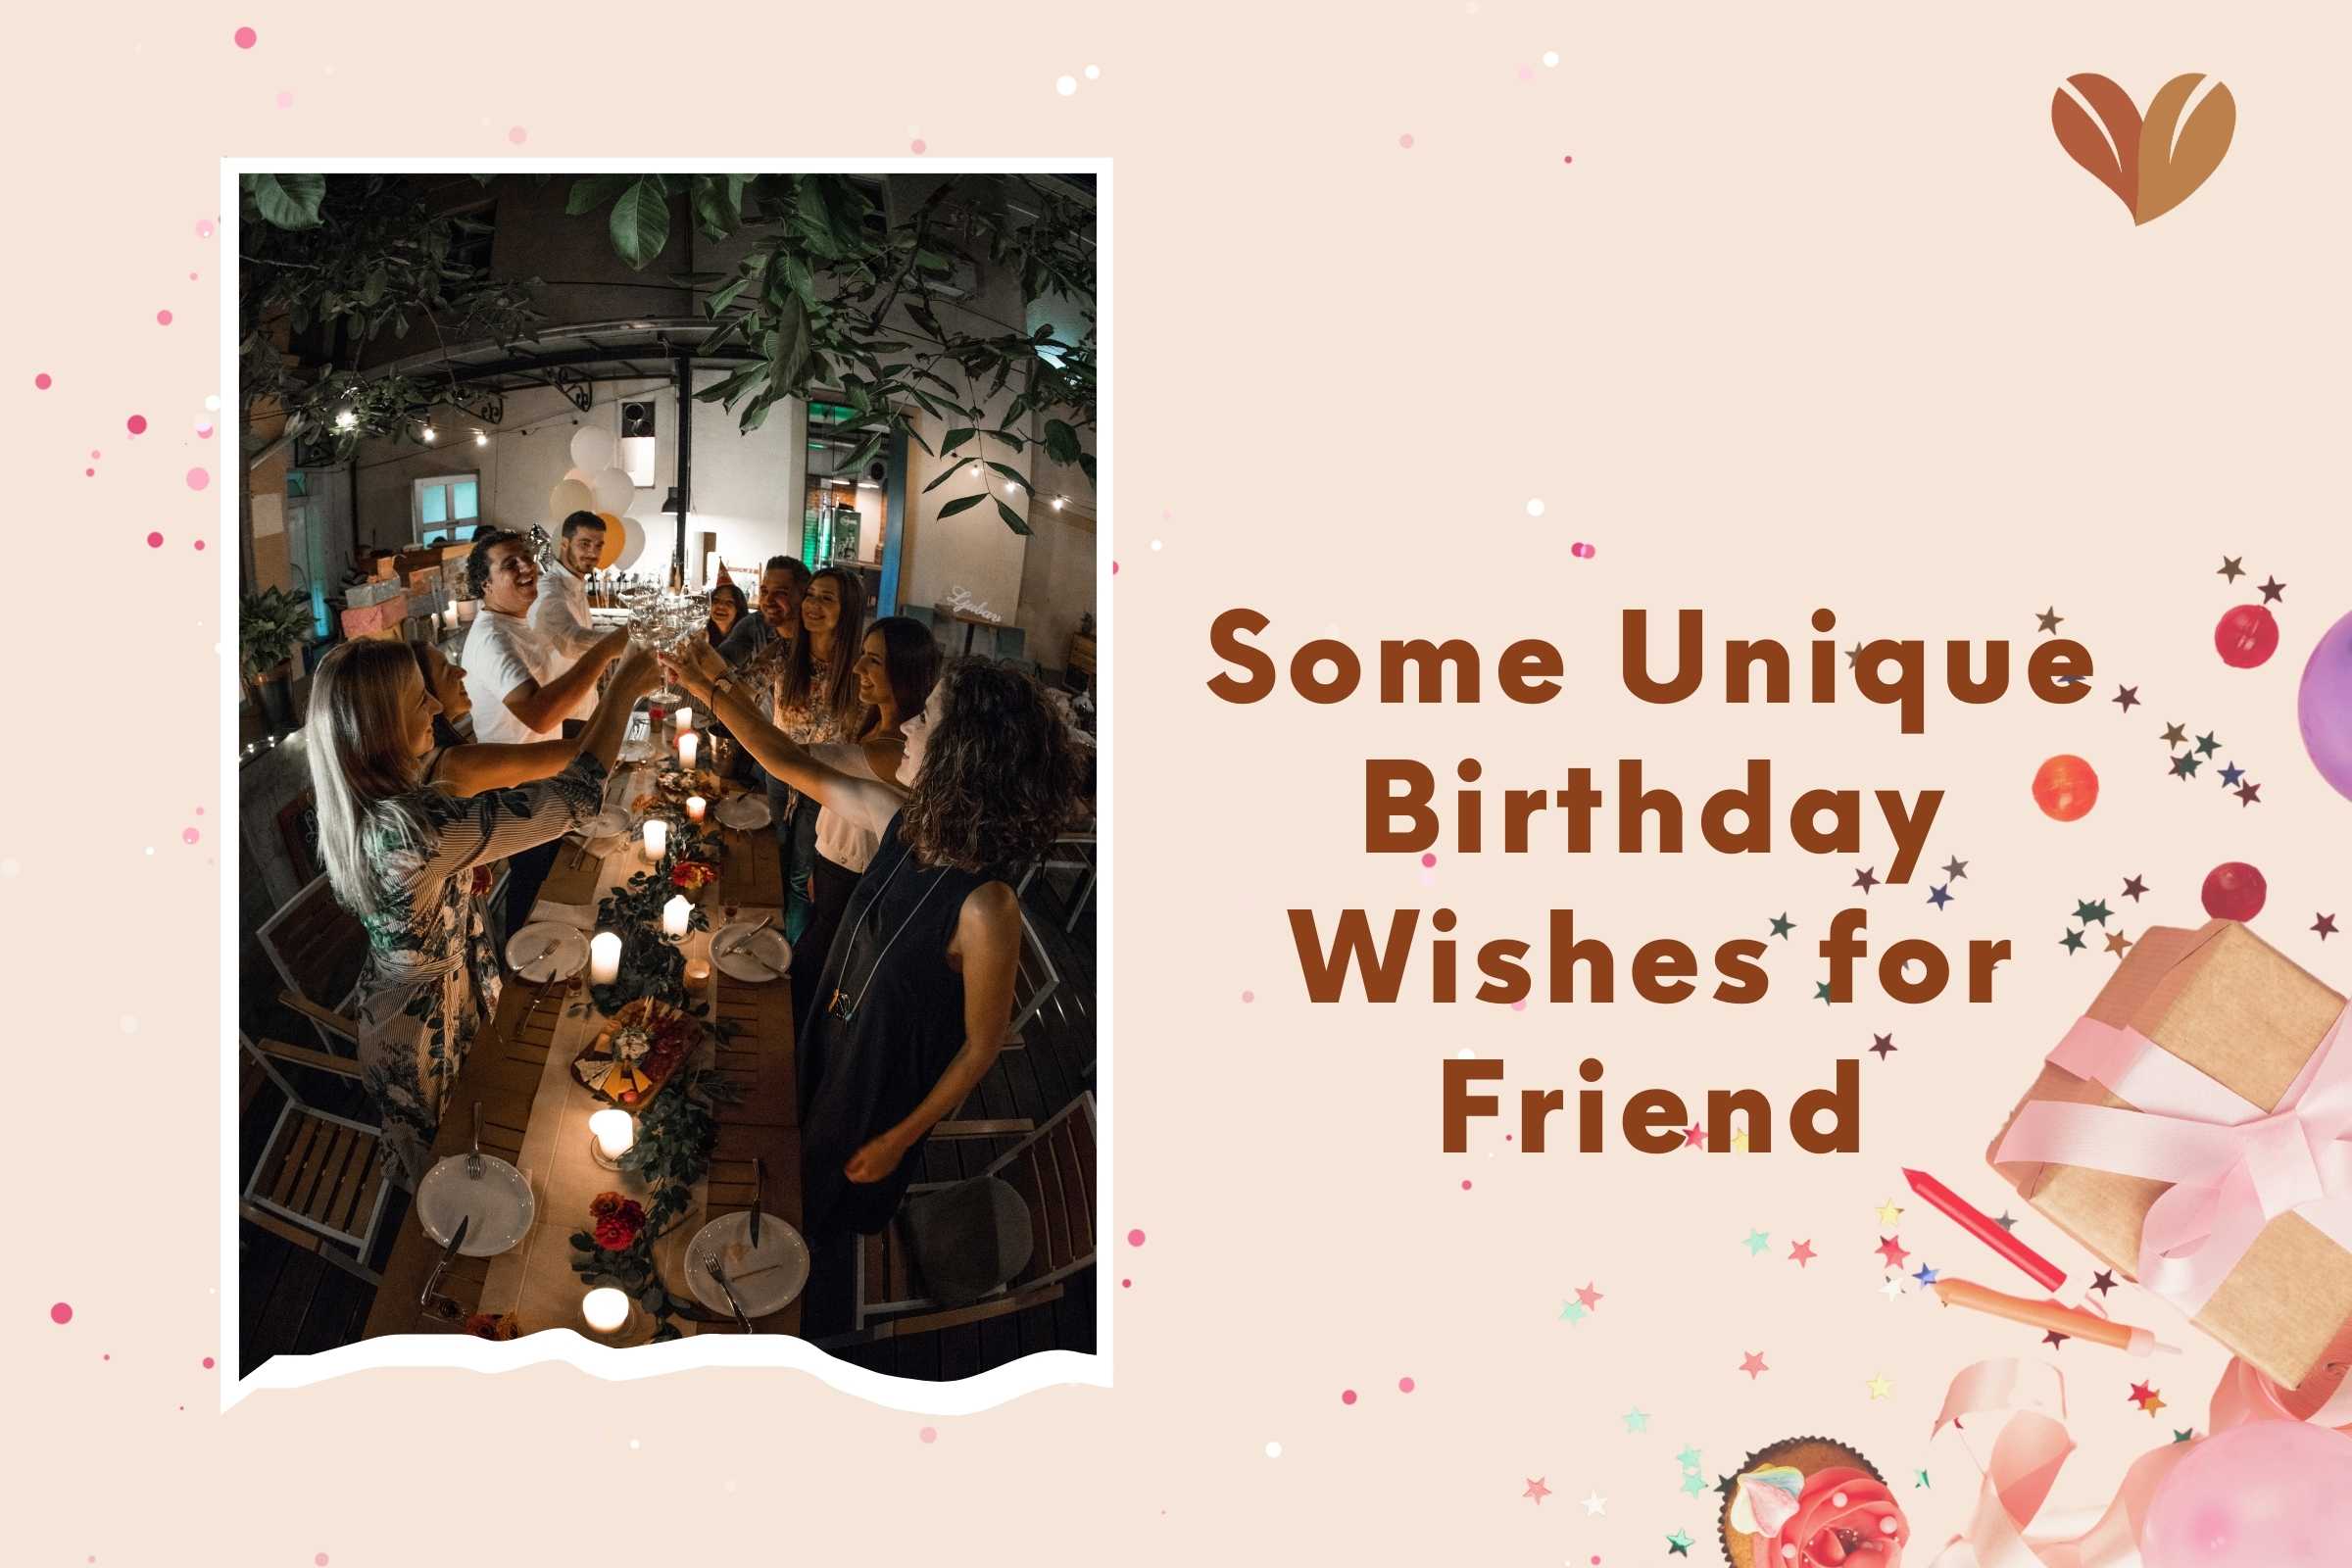 Toast to laughter and cherished moments with 'birthday wishes for friend,' a true companion.